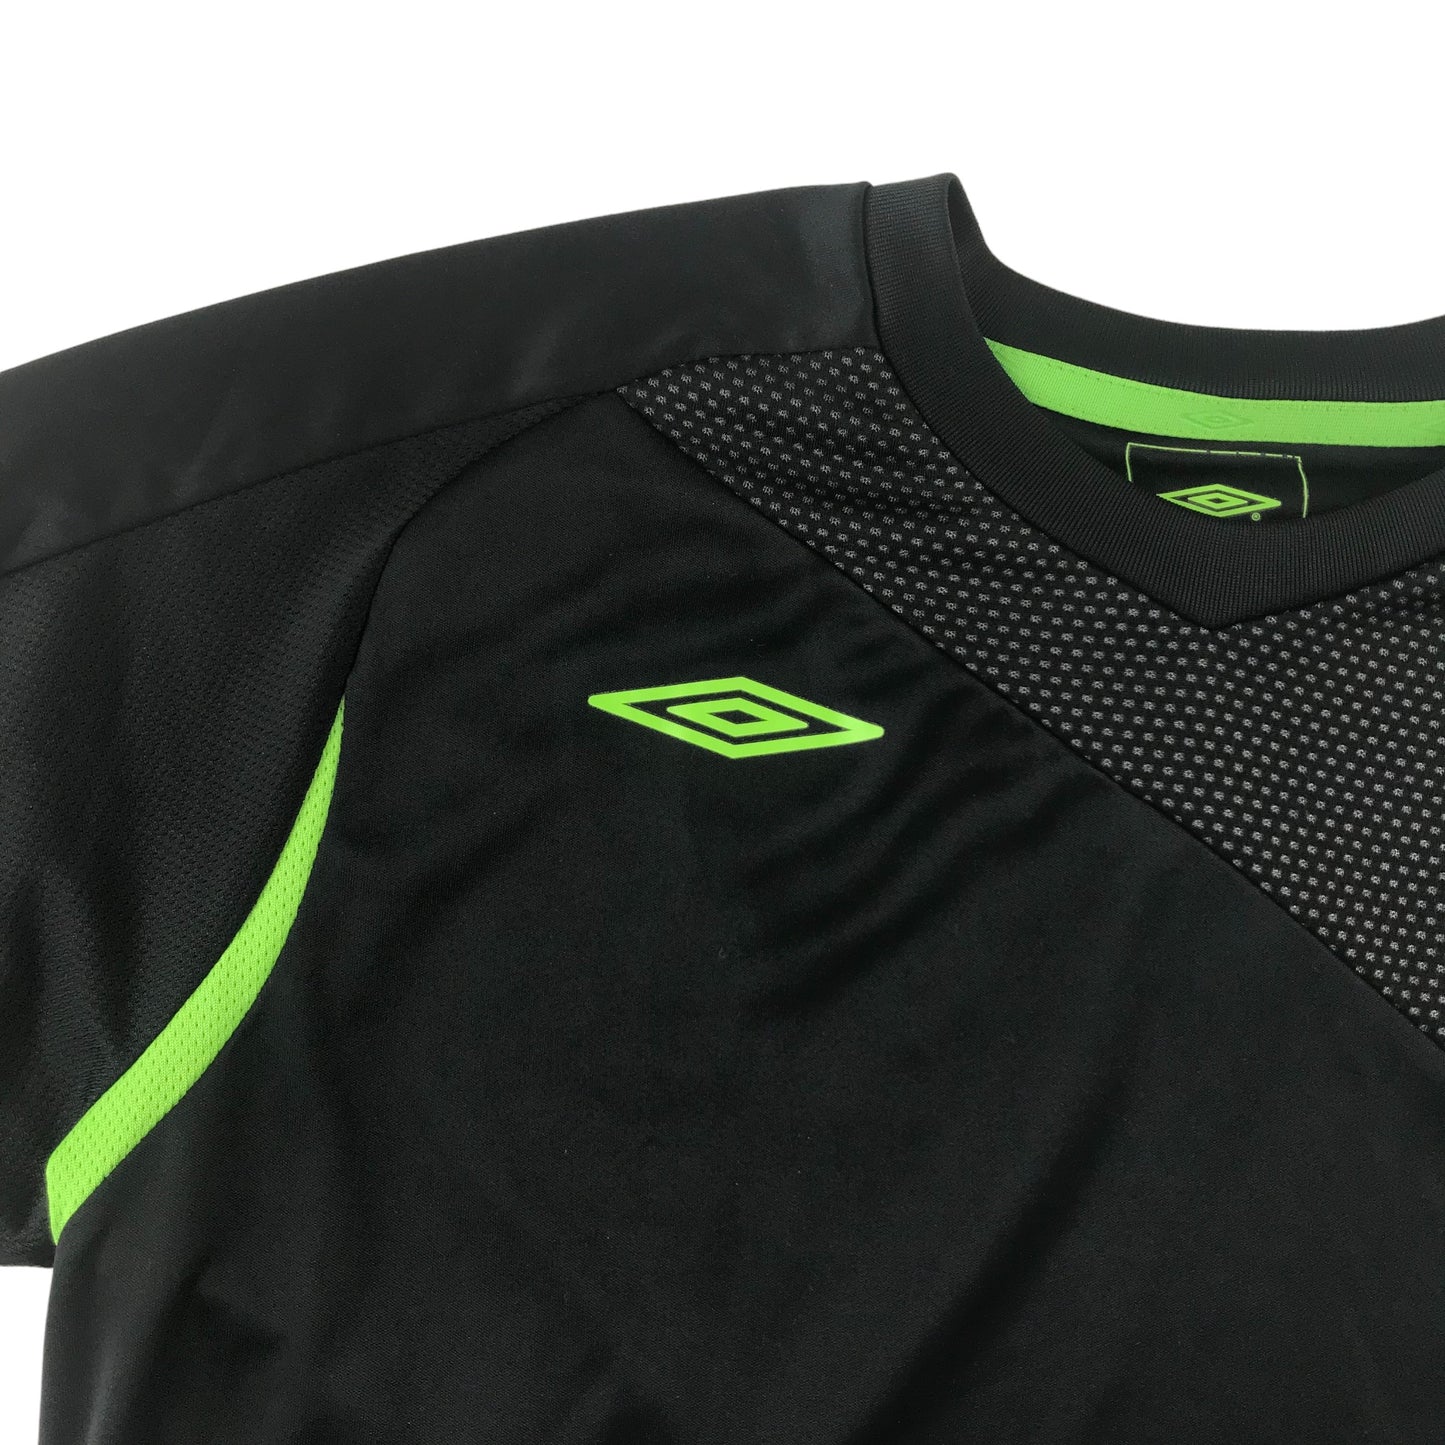 Umbro S5 Sports Top Age 13 Black Plain with Logo and Neon Green Details